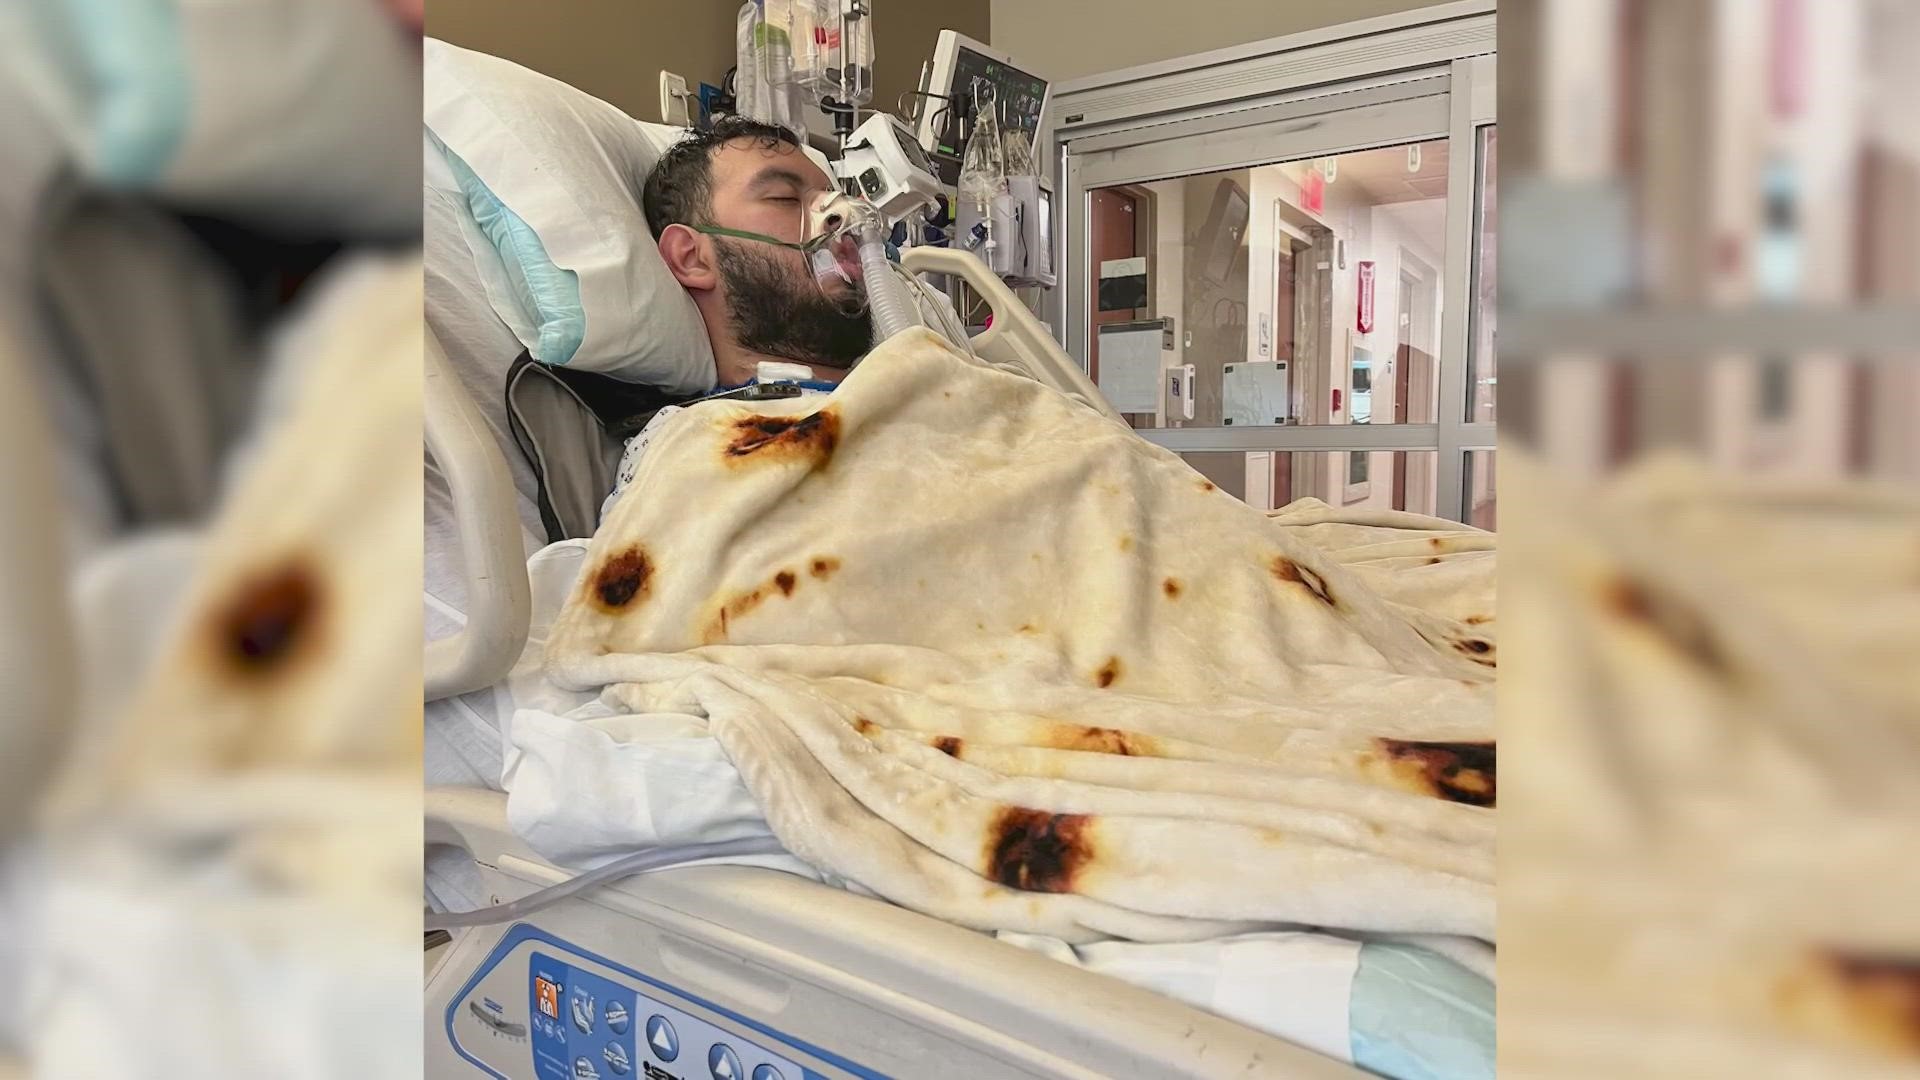 Texas State student Angel Anthony Cortez was diagnosed with Guillain-Barré syndrome, a rare disorder in which the body’s immune system attacks the nerves.